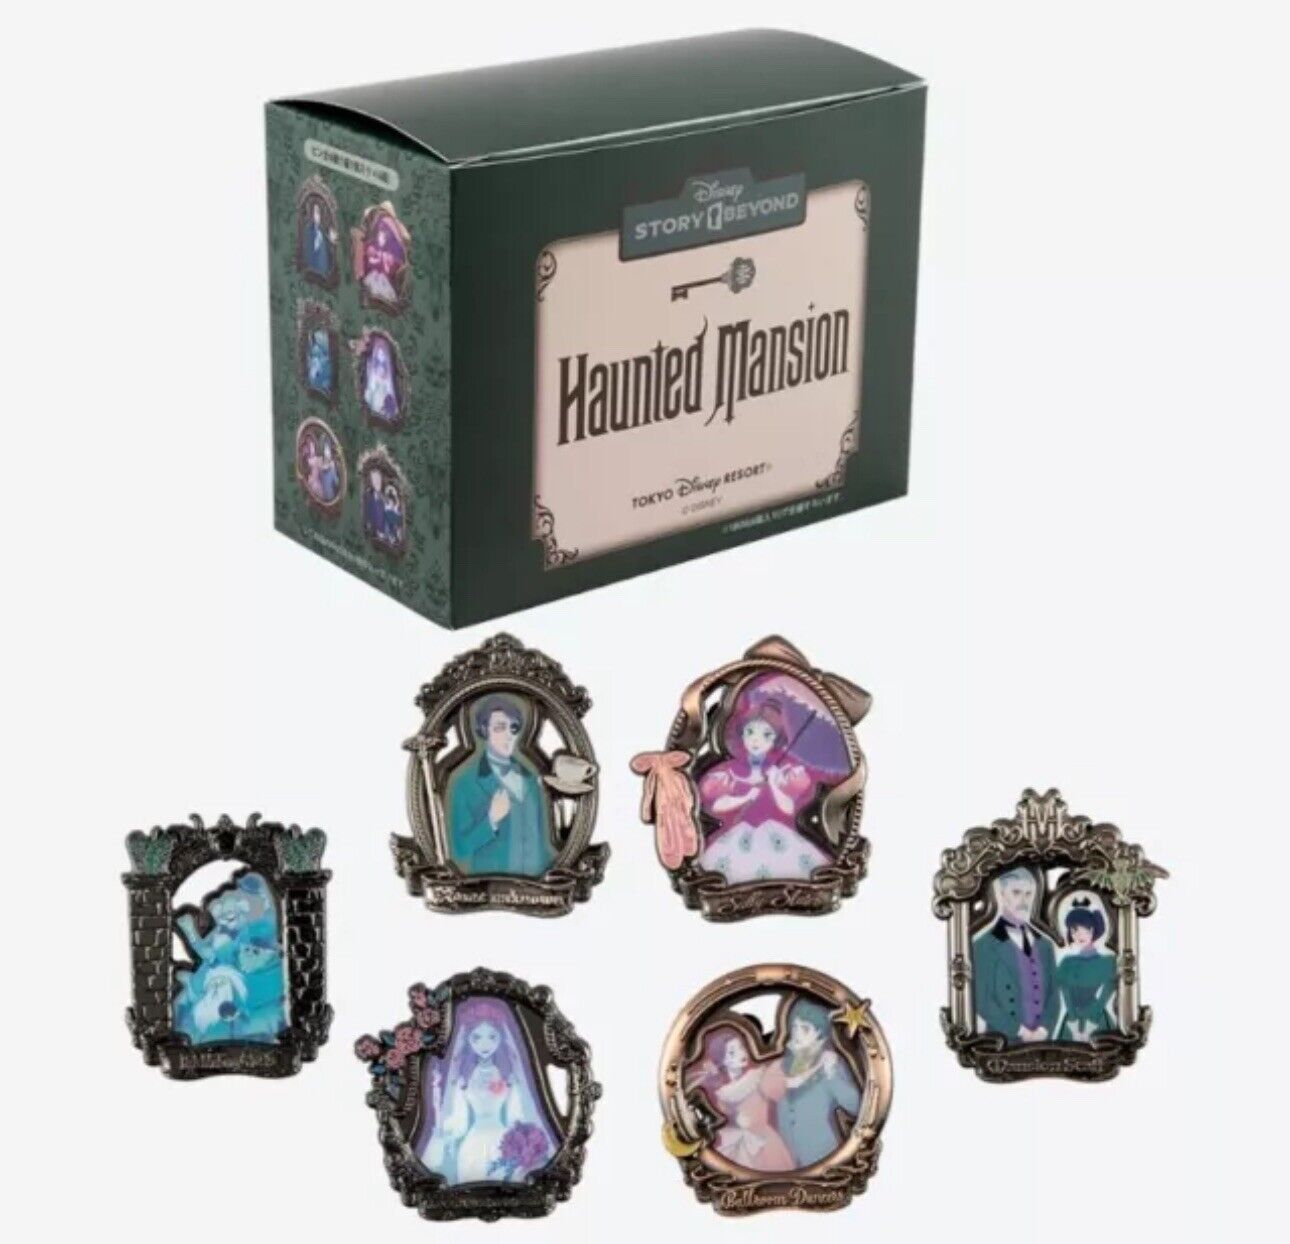 Tokyo Disneyland Haunted Mansion Pin Set Full Set Of 6 Stained Glass Pins